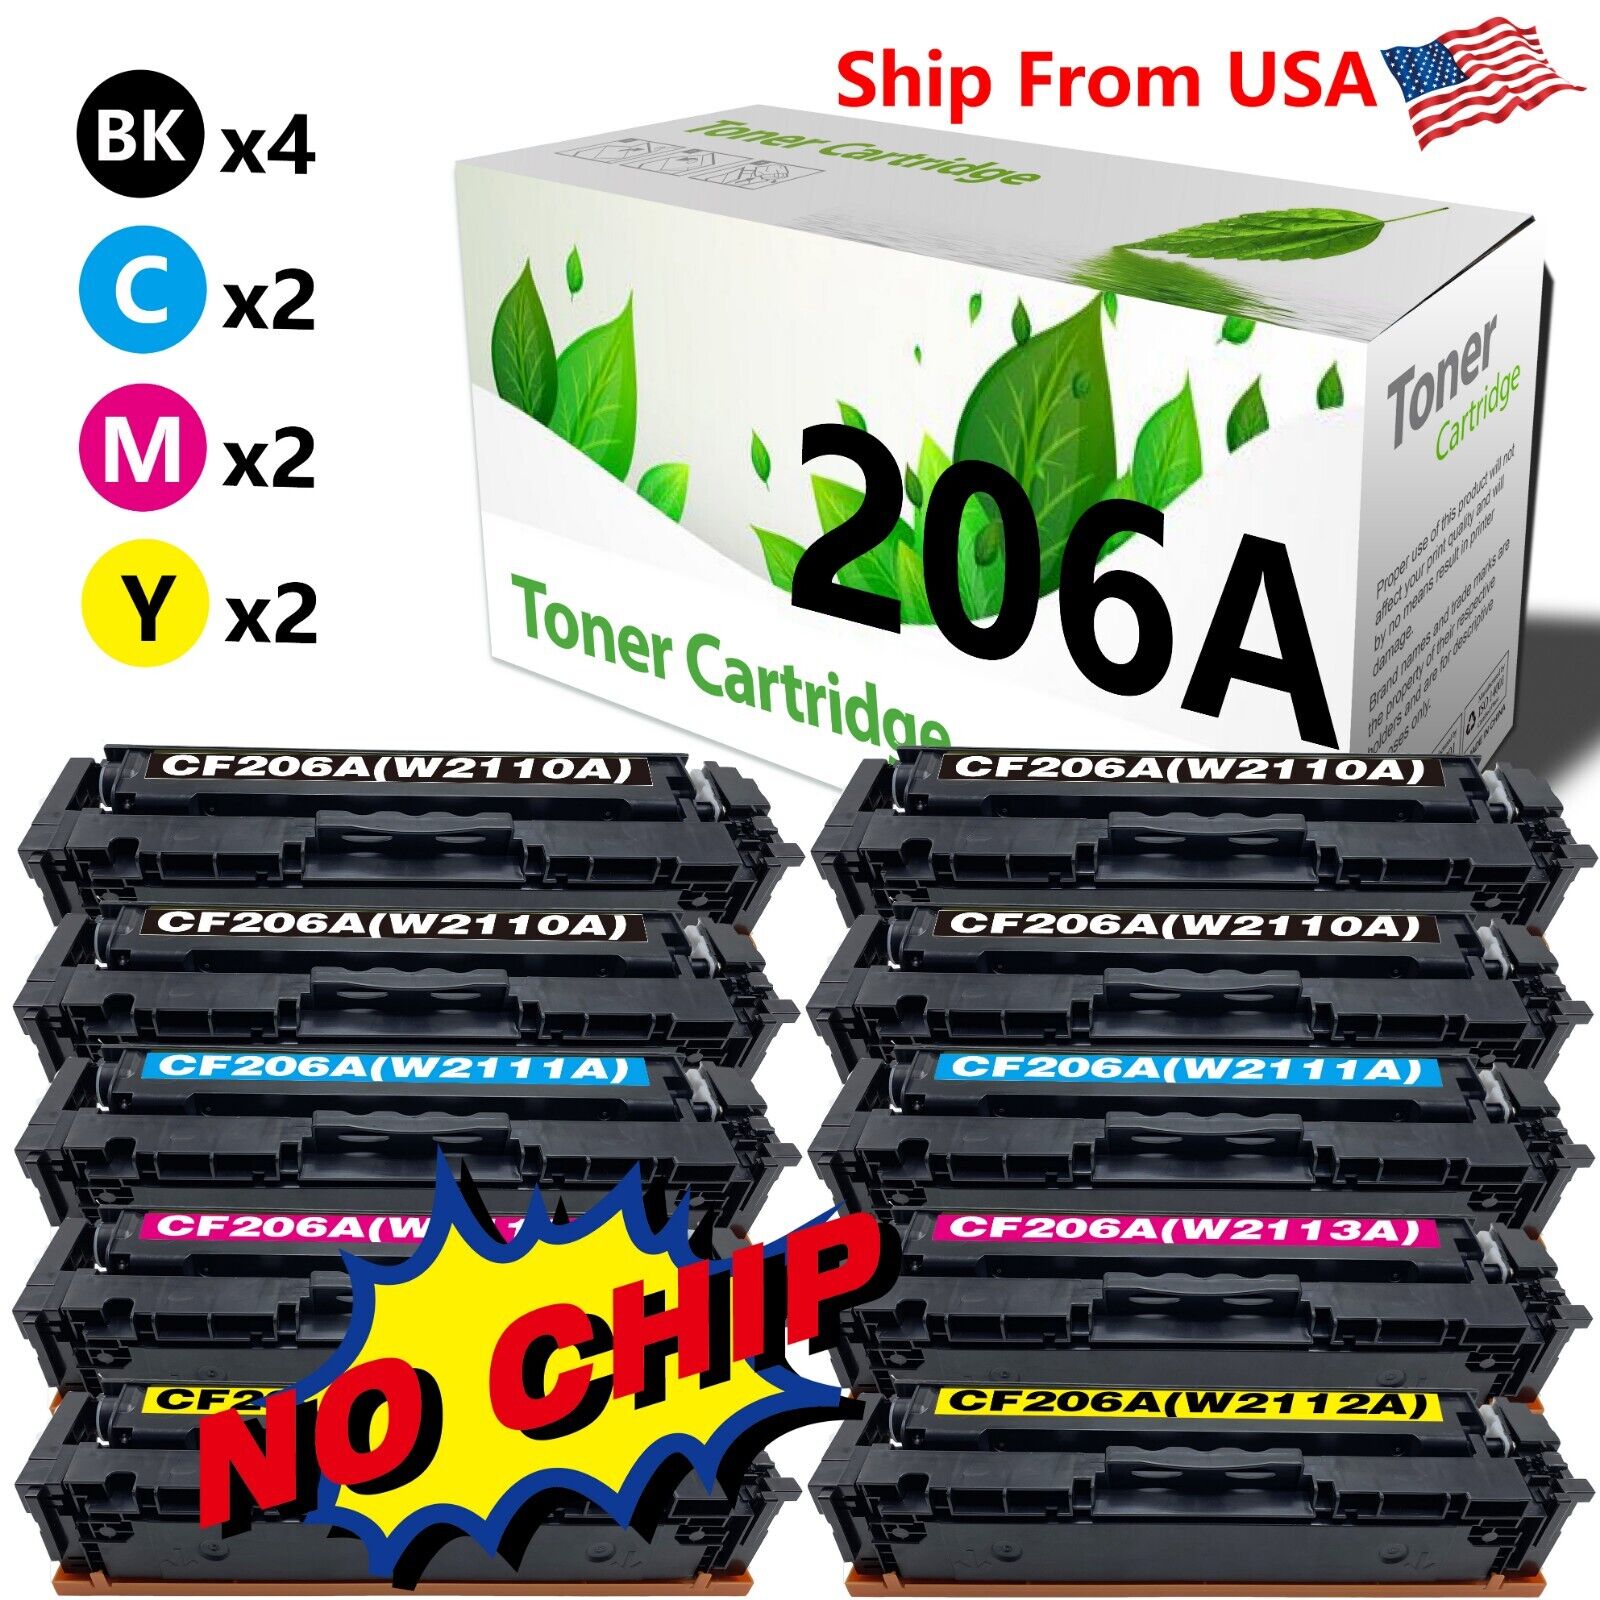 10Pack CF206A Toner Cartridges W2110A-13A no chip for M255nw M283cdw M283fdn